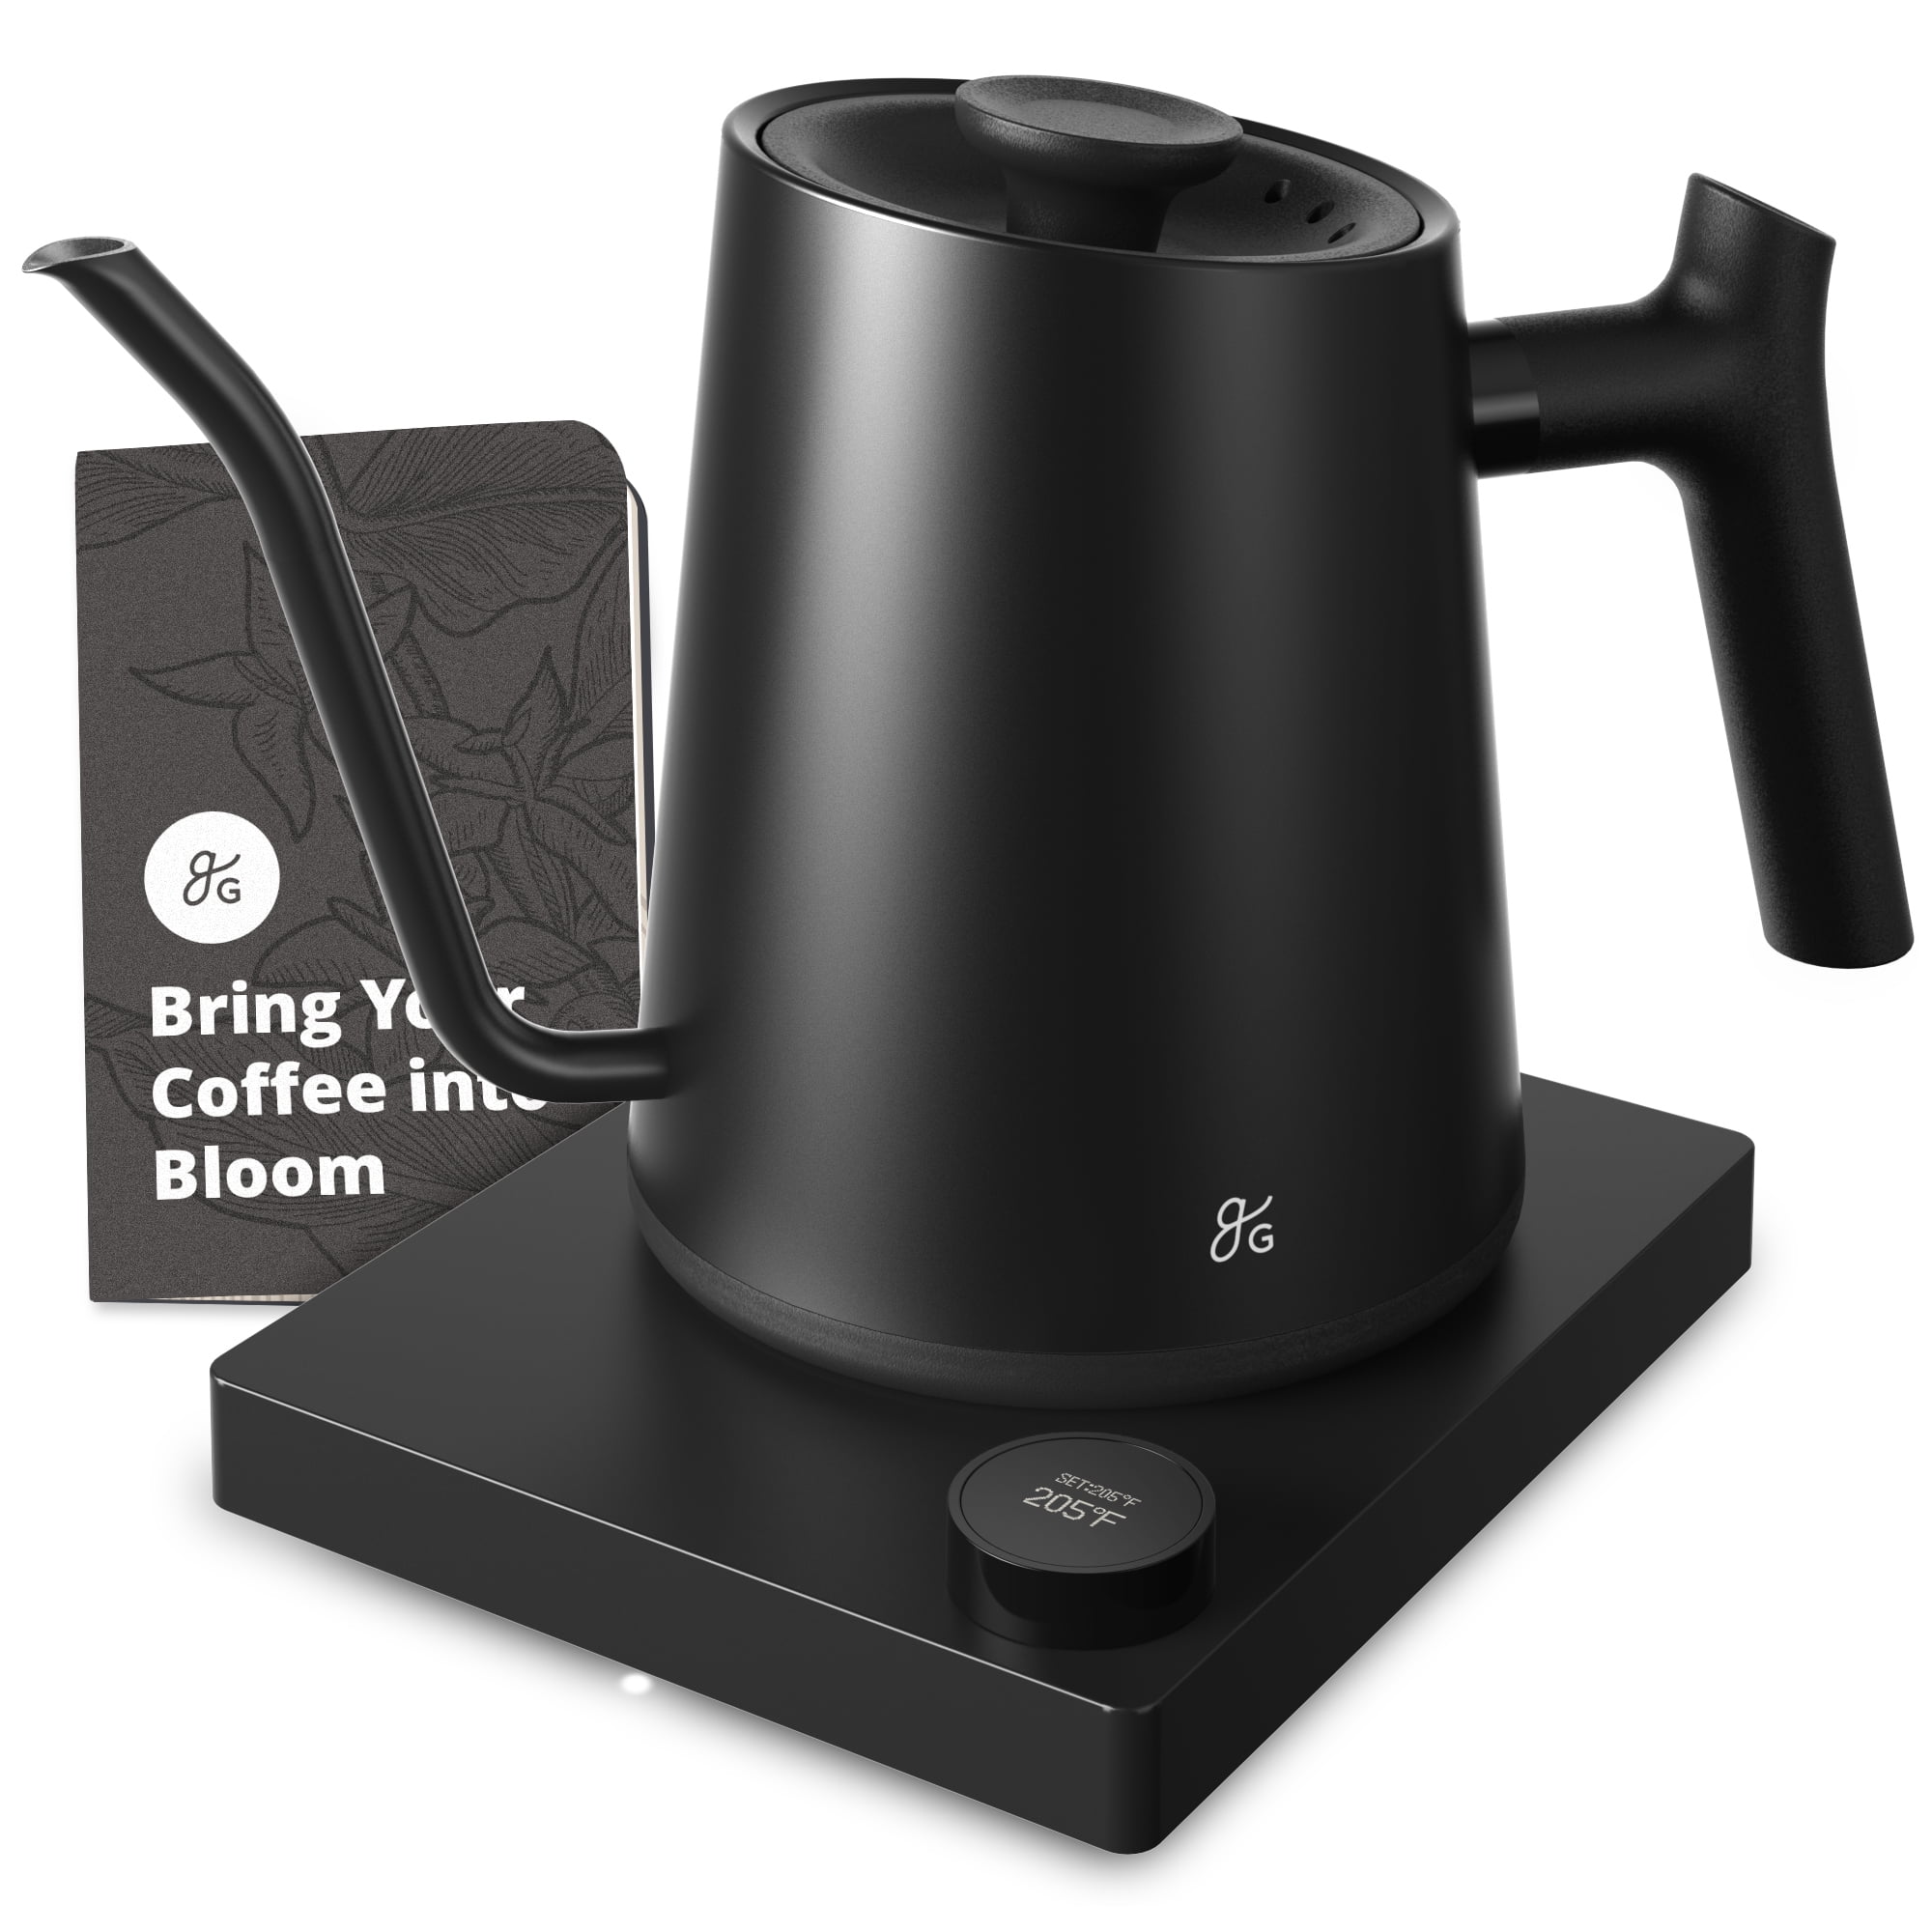 12 Reasons Why Use a Gooseneck Kettle for Pour Over Coffee – LuxHaus